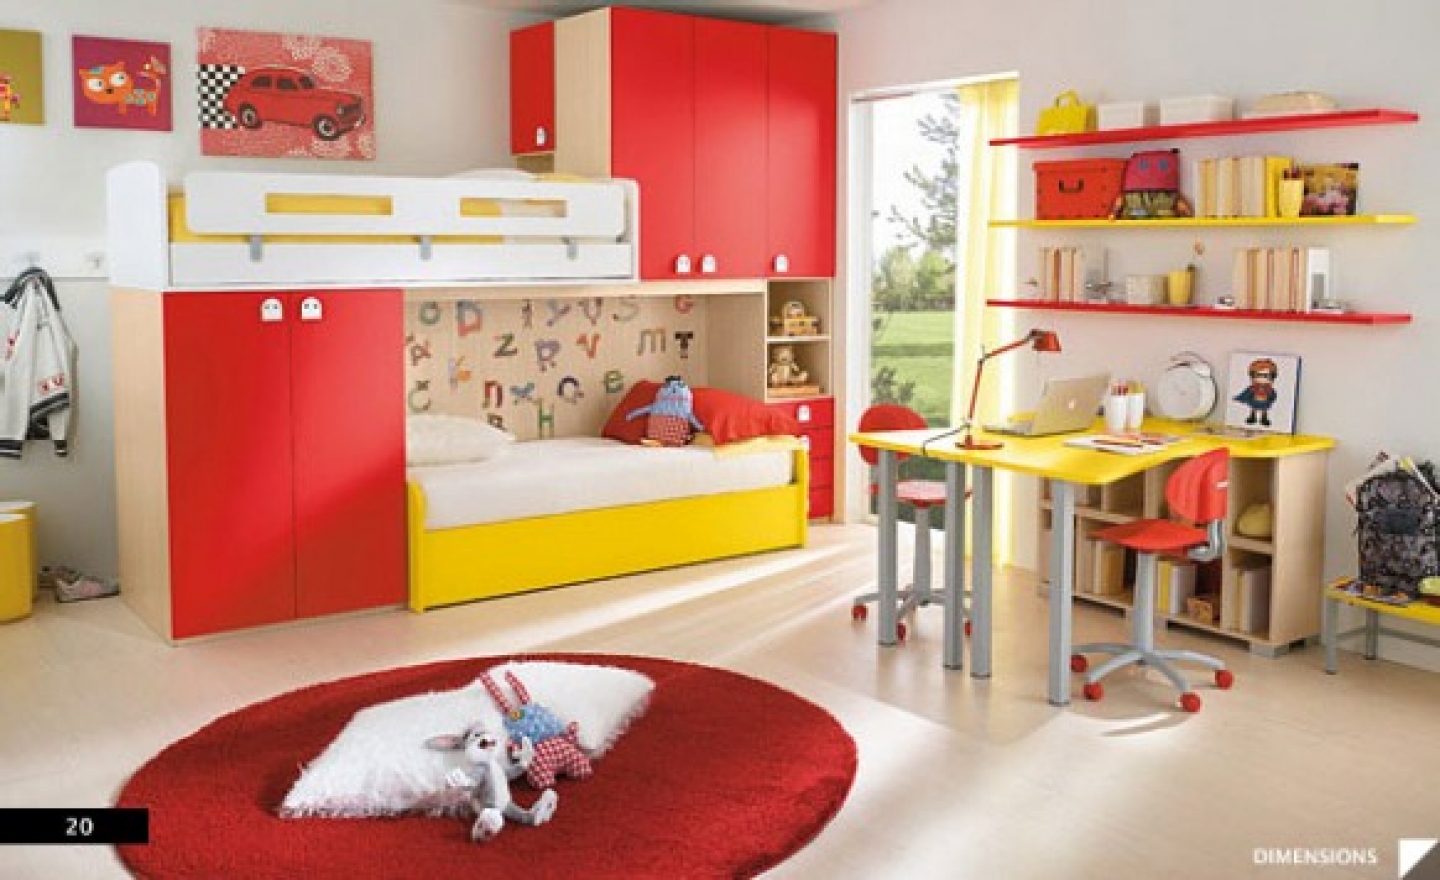 decorating ideas for kids bedrooms photo - 2